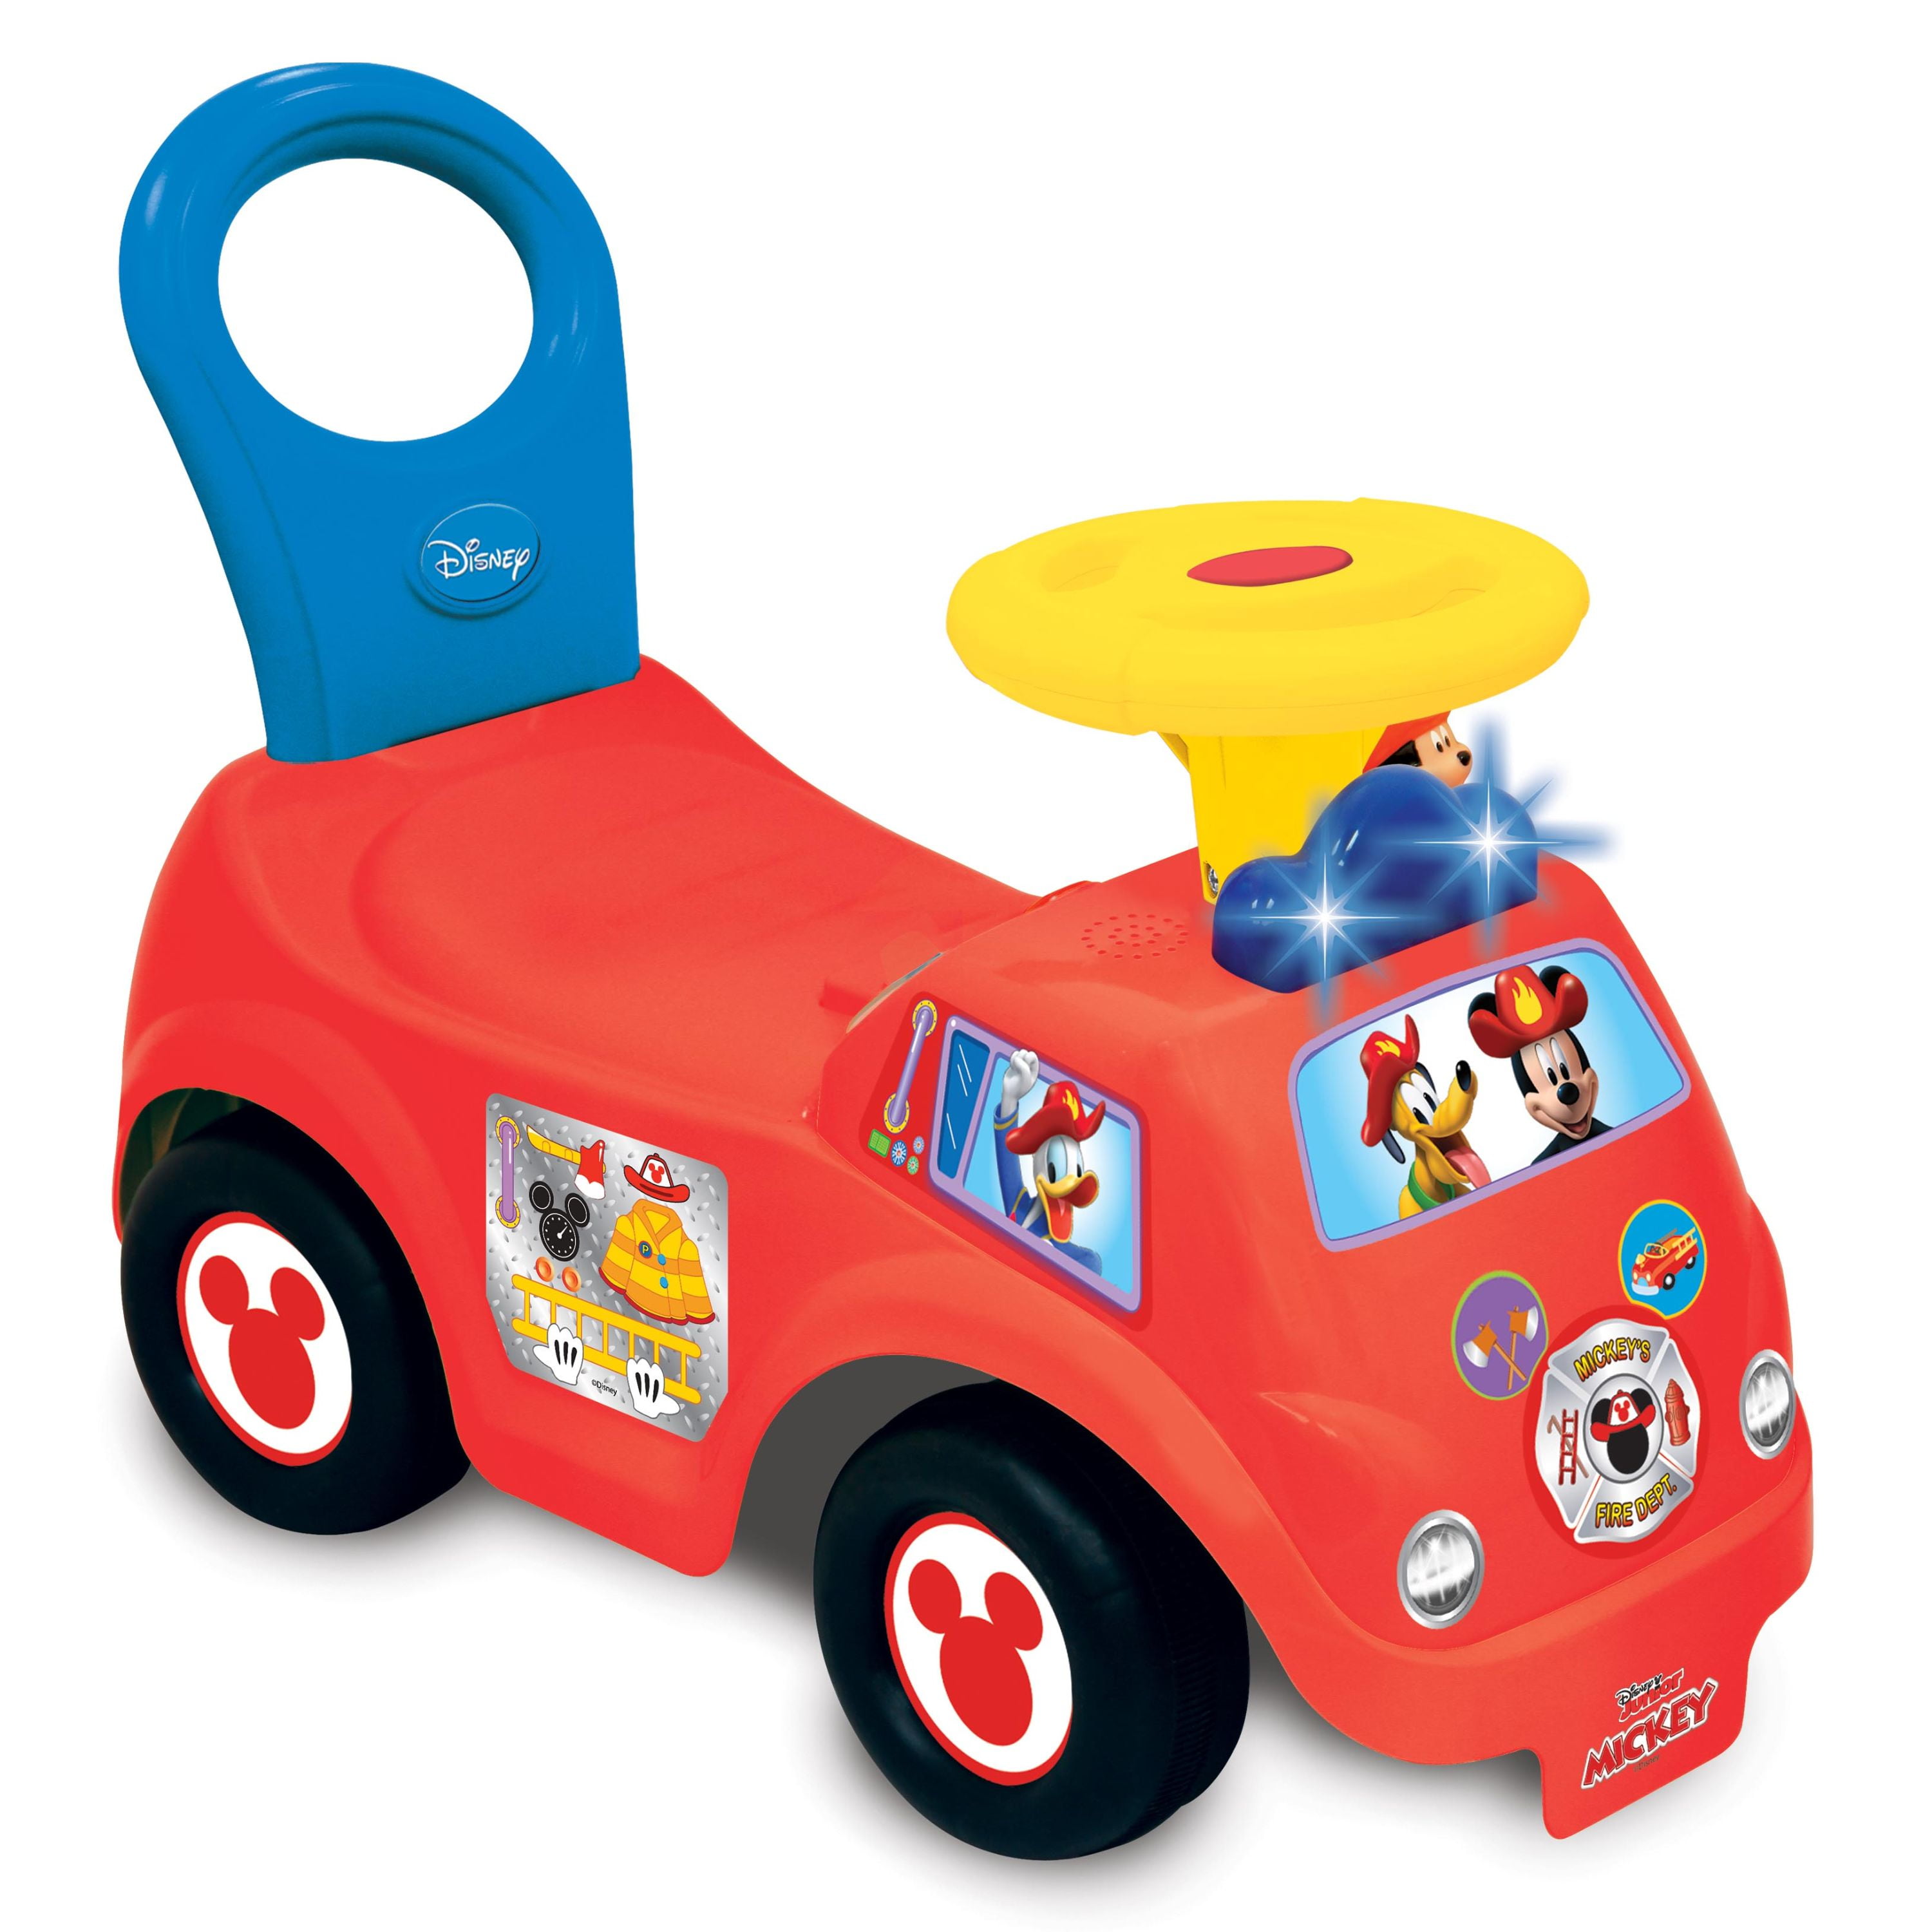 Kiddieland KDL- 050815 Light n' Sound Mickey Mouse Activity Fire Engine Kid Toy Car with Sticker Decal and Interactive Buttons for Ages 1-3 Years, Red